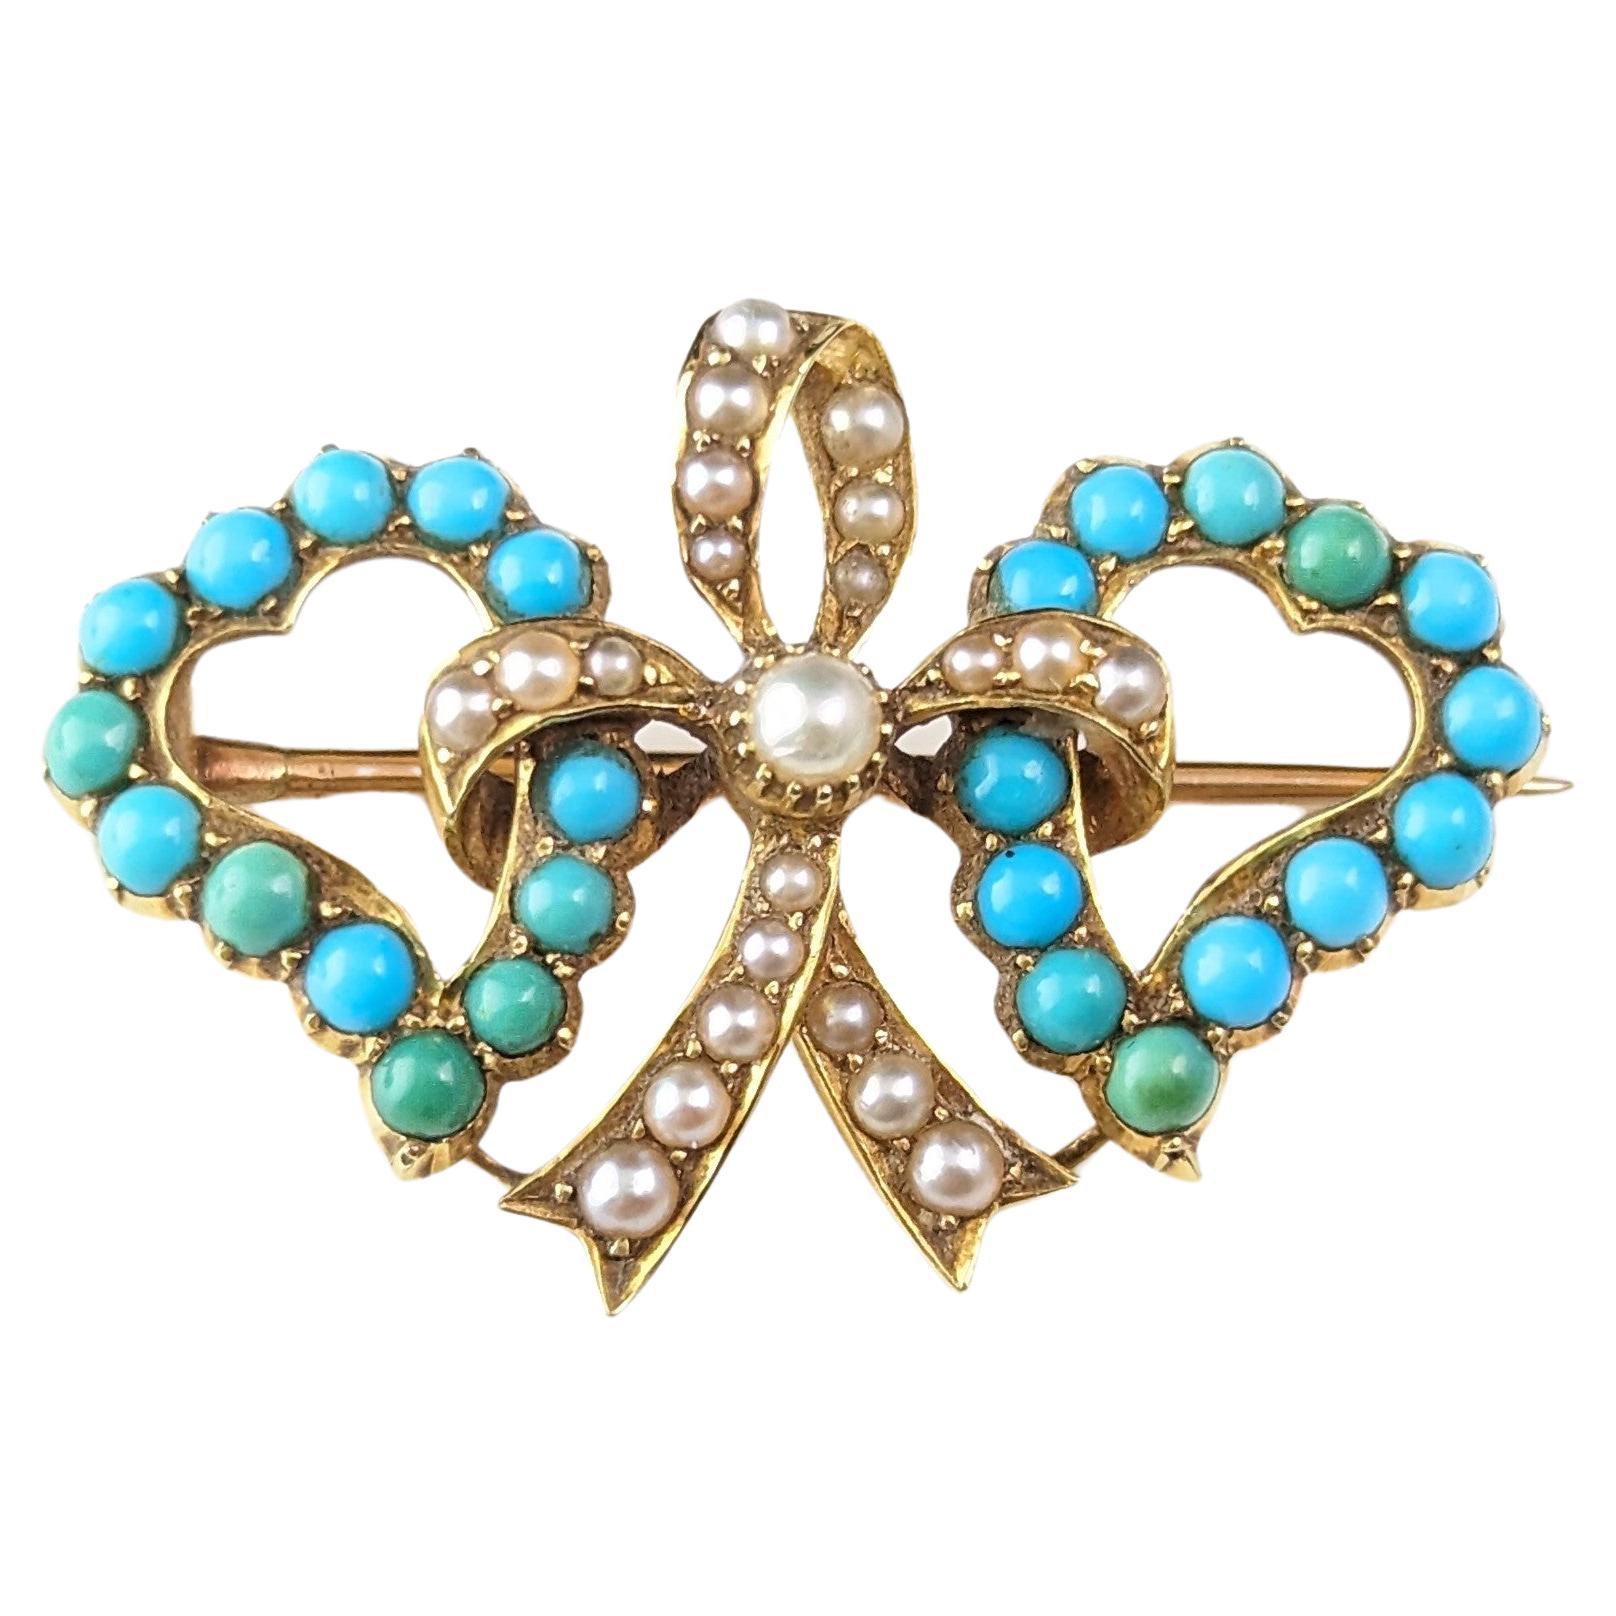 Antique Victorian double Witches heart brooch, 22k gold, Turquoise and pearl 